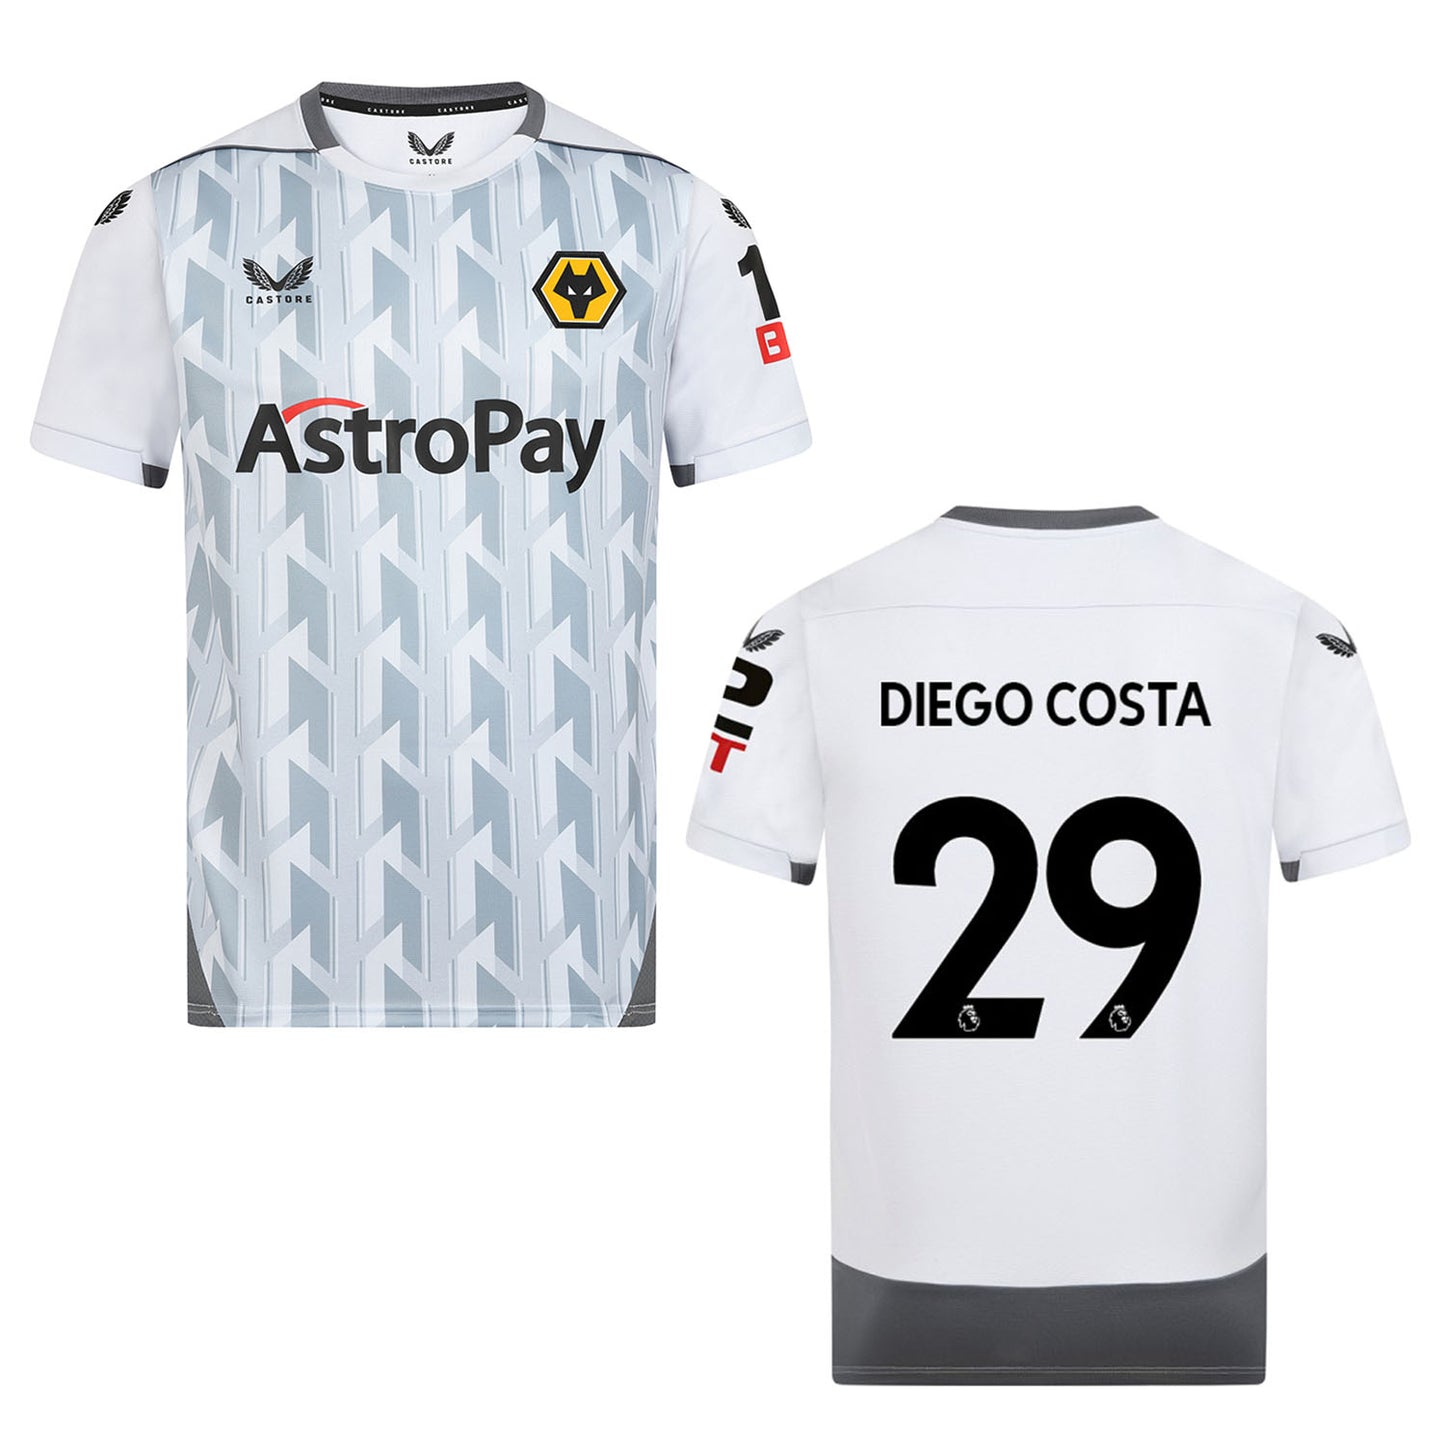 Diego Costa Wolves 29 Jersey